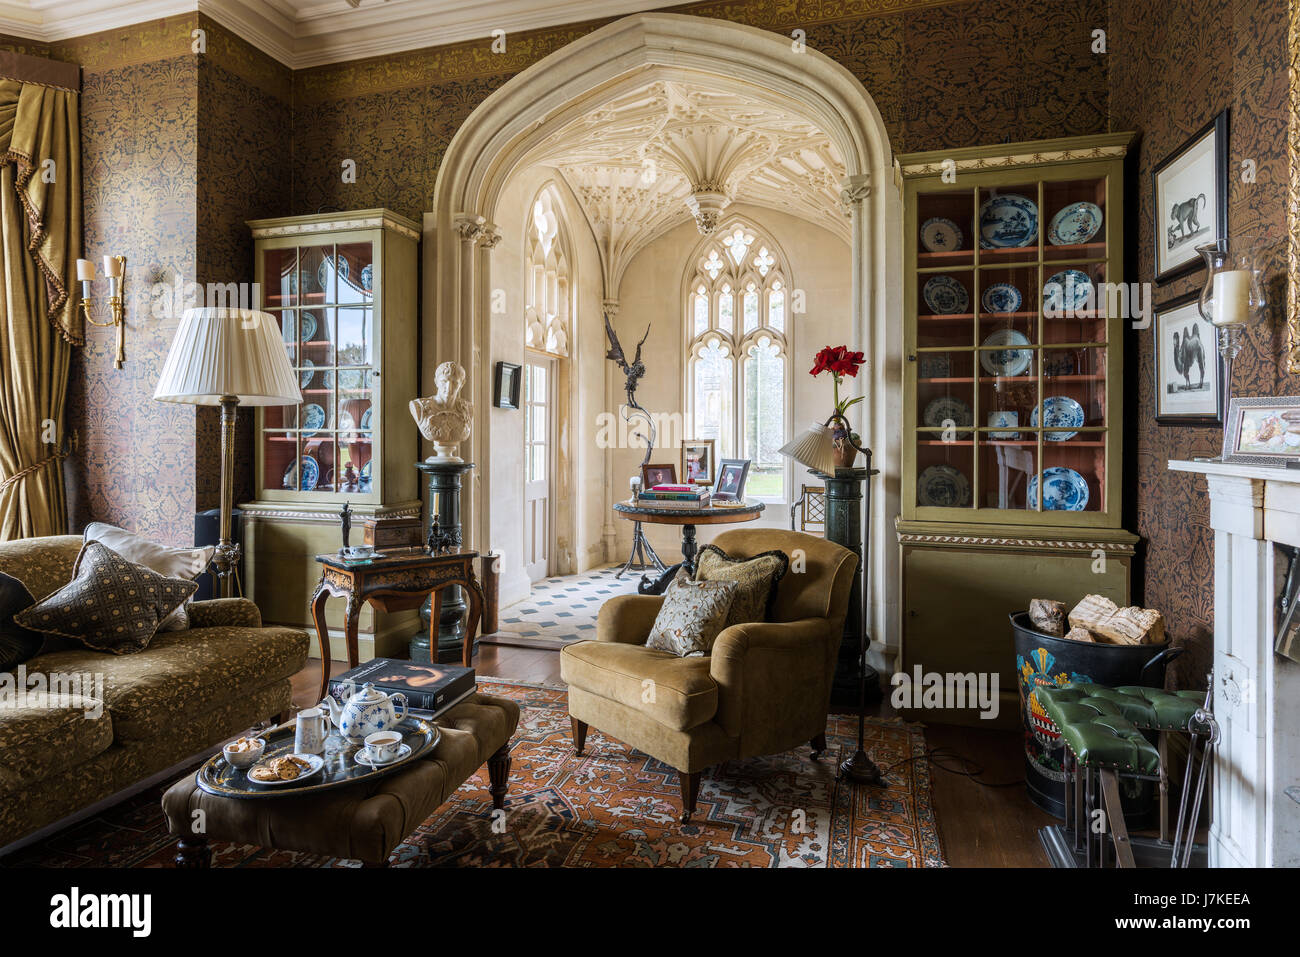 Patterned wallpaper by Zuber in library with antique persian rug and Gothic windows. The sofa and armchairs are from Beaumont & Flectcher Stock Photo